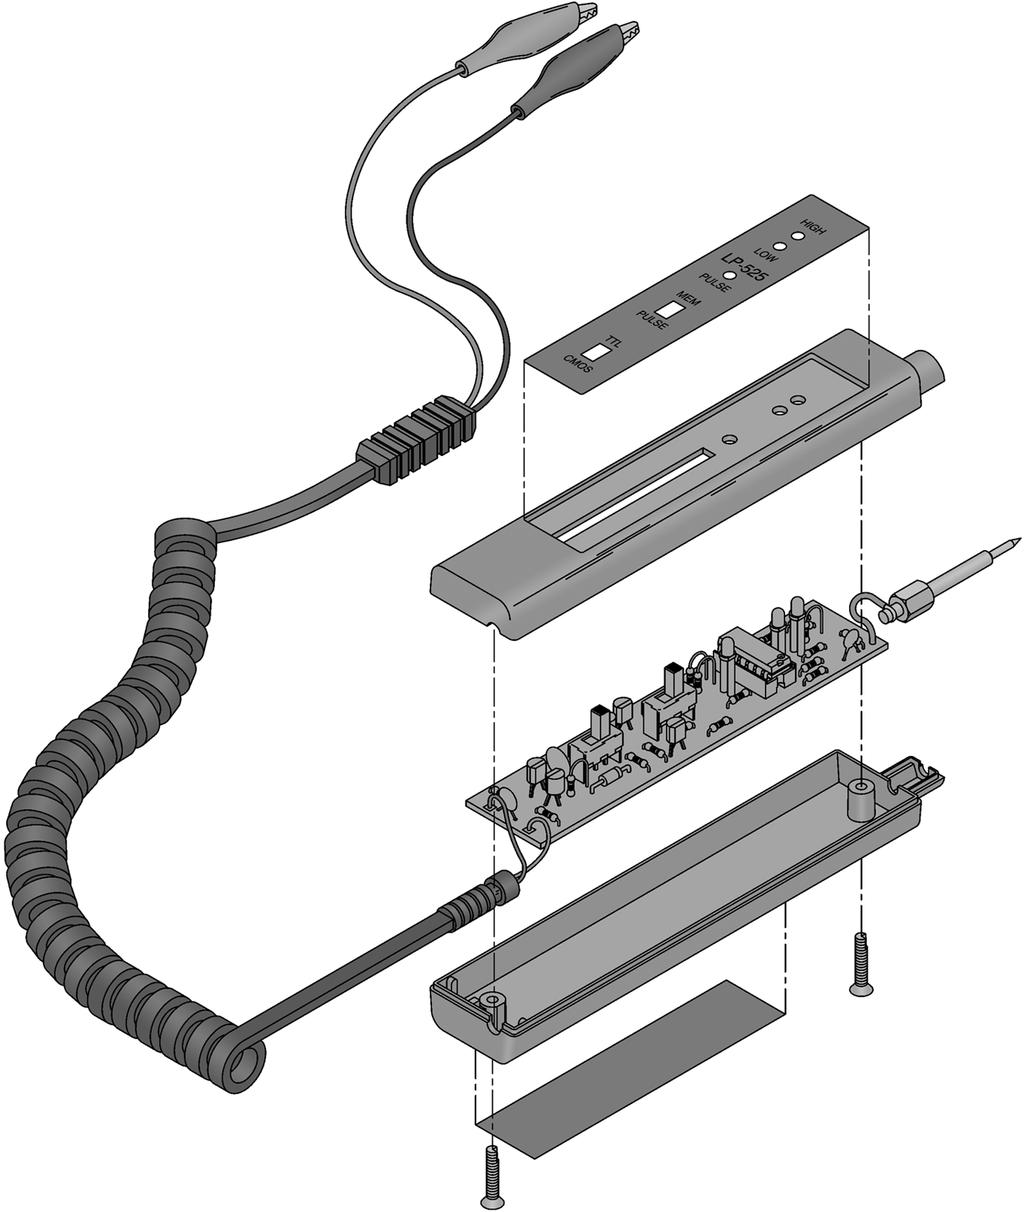 r Install the power cord as shown in Figure 9.